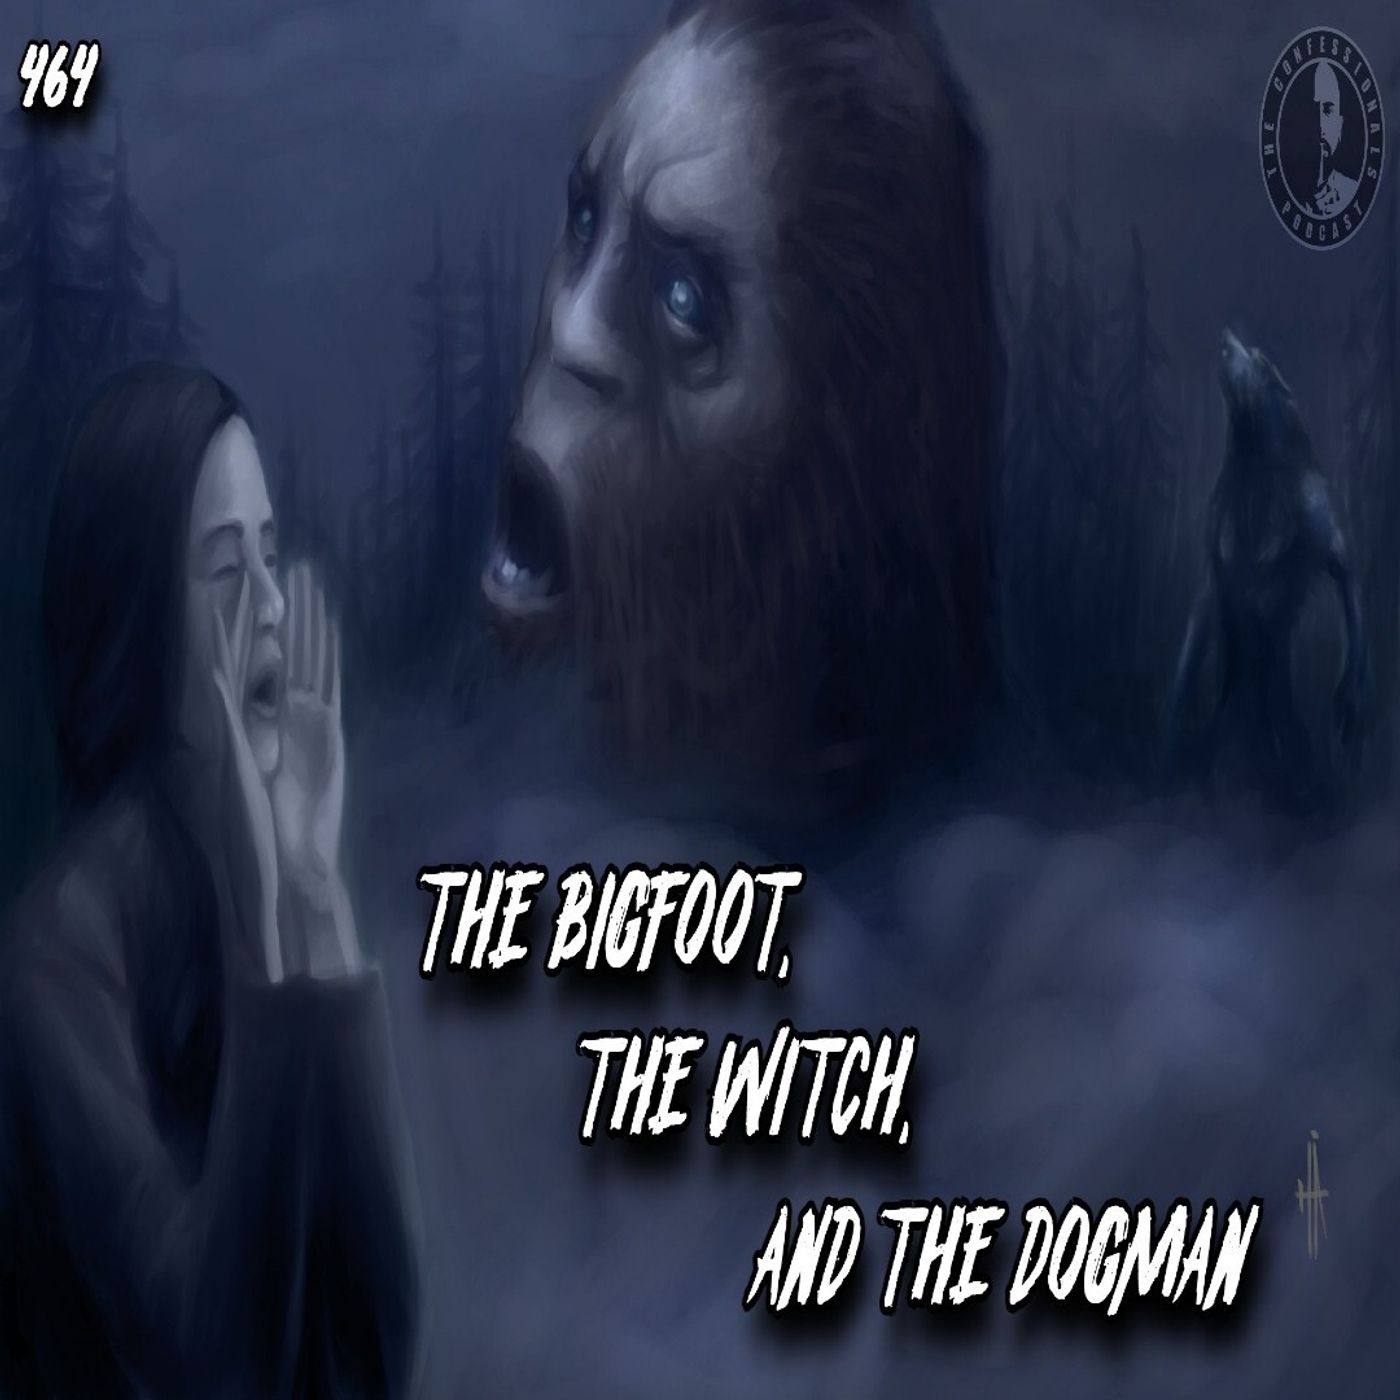 464: The Bigfoot, The Witch, and The Dogman